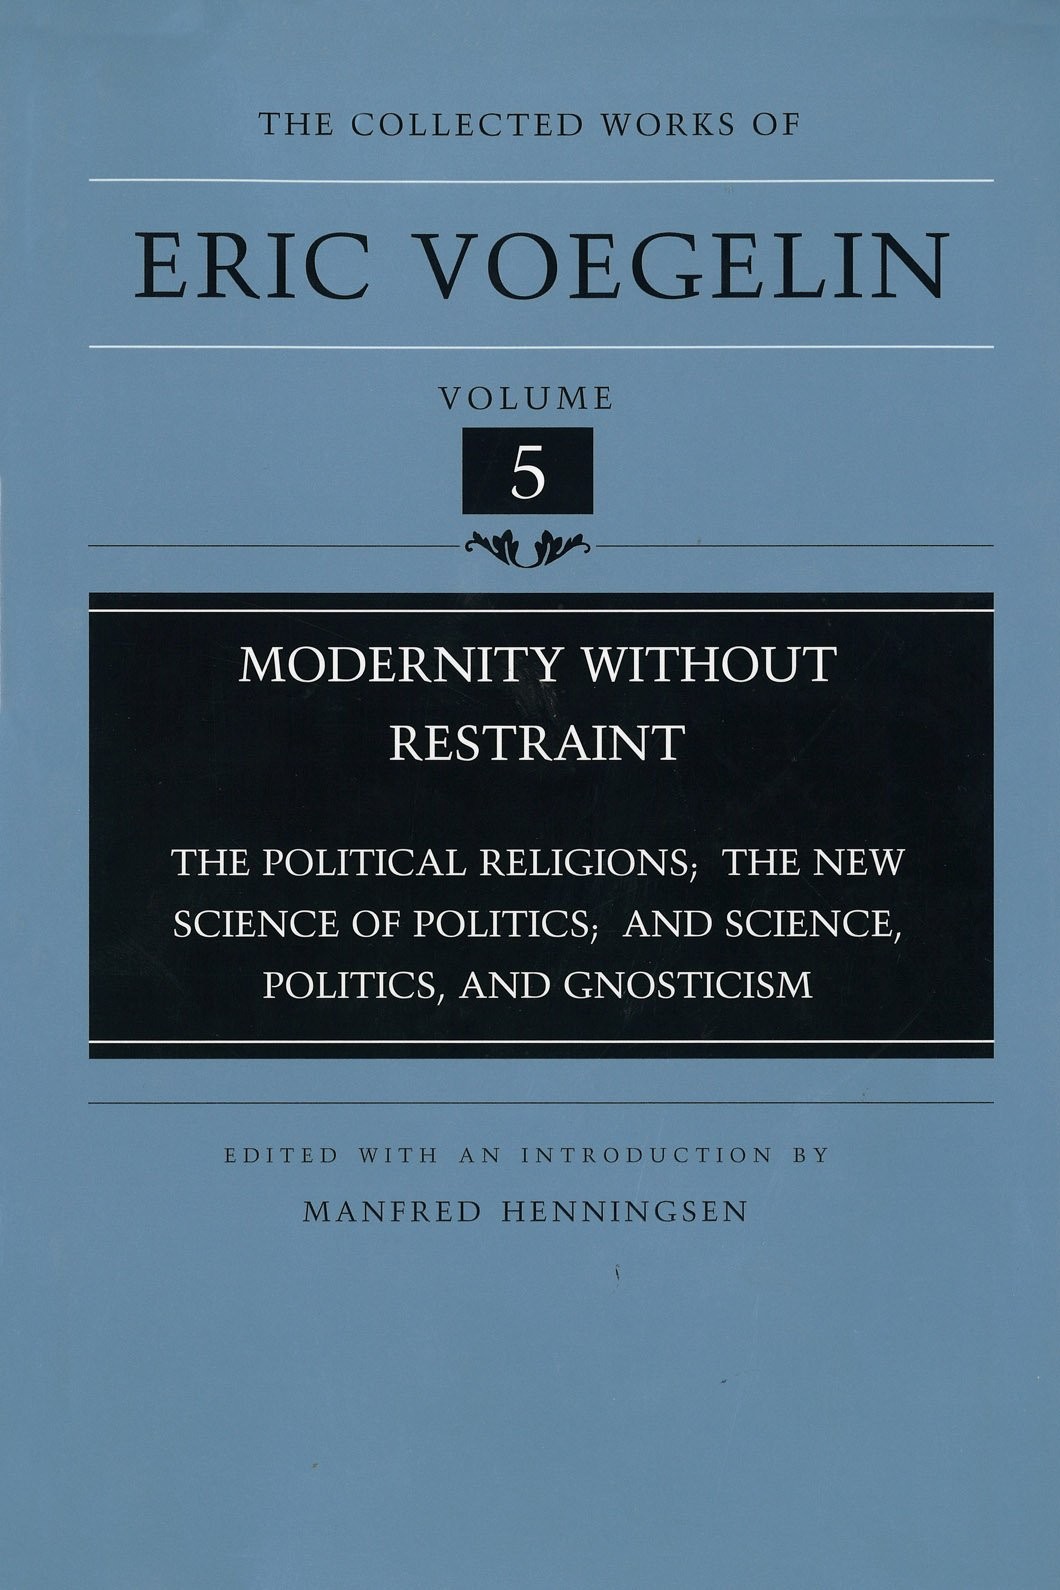 The Collected Works of Eric Voegelin: Modernity Without Restraint